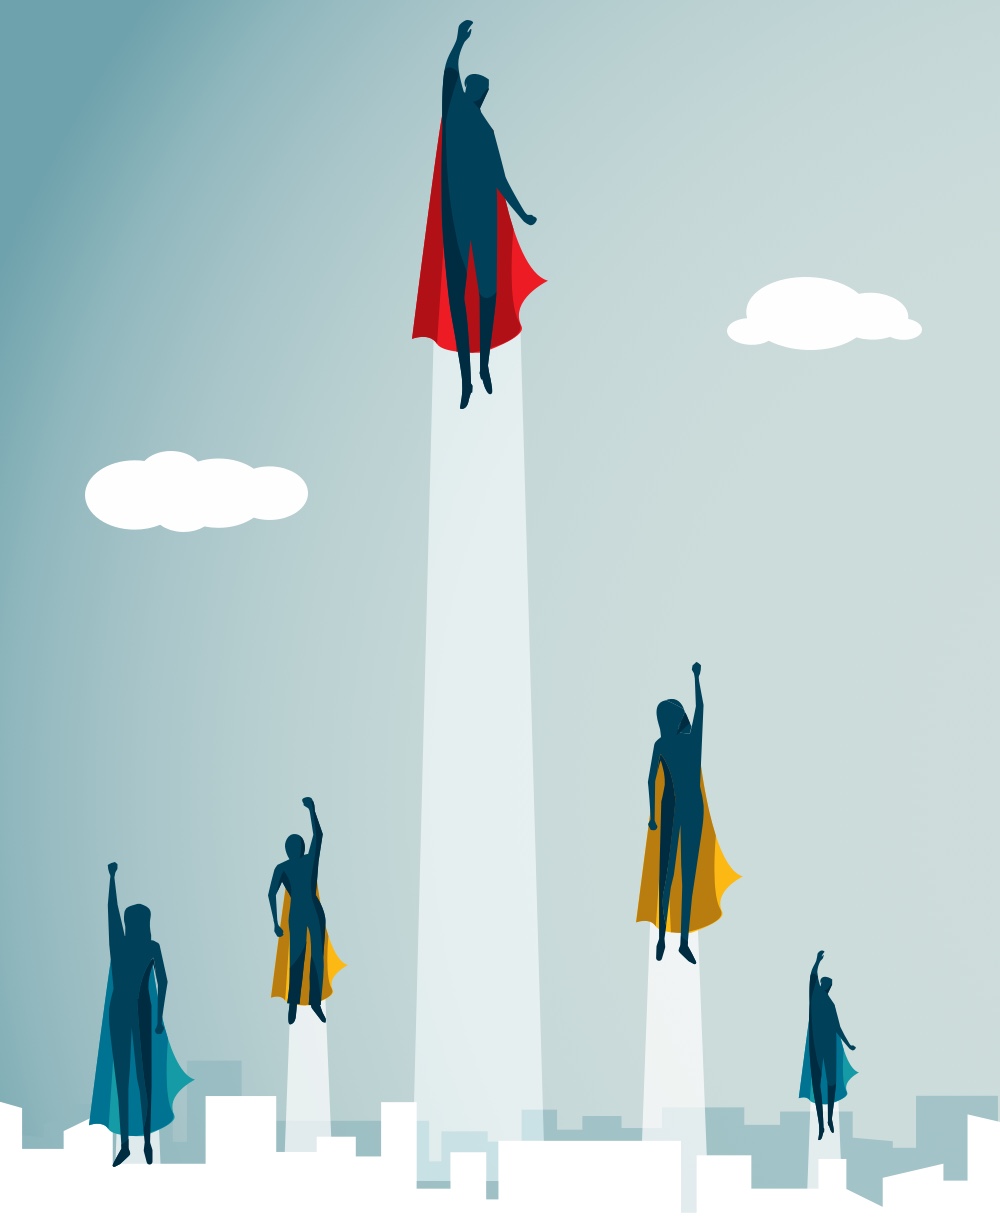 Illustrations of people wearing capes and flying